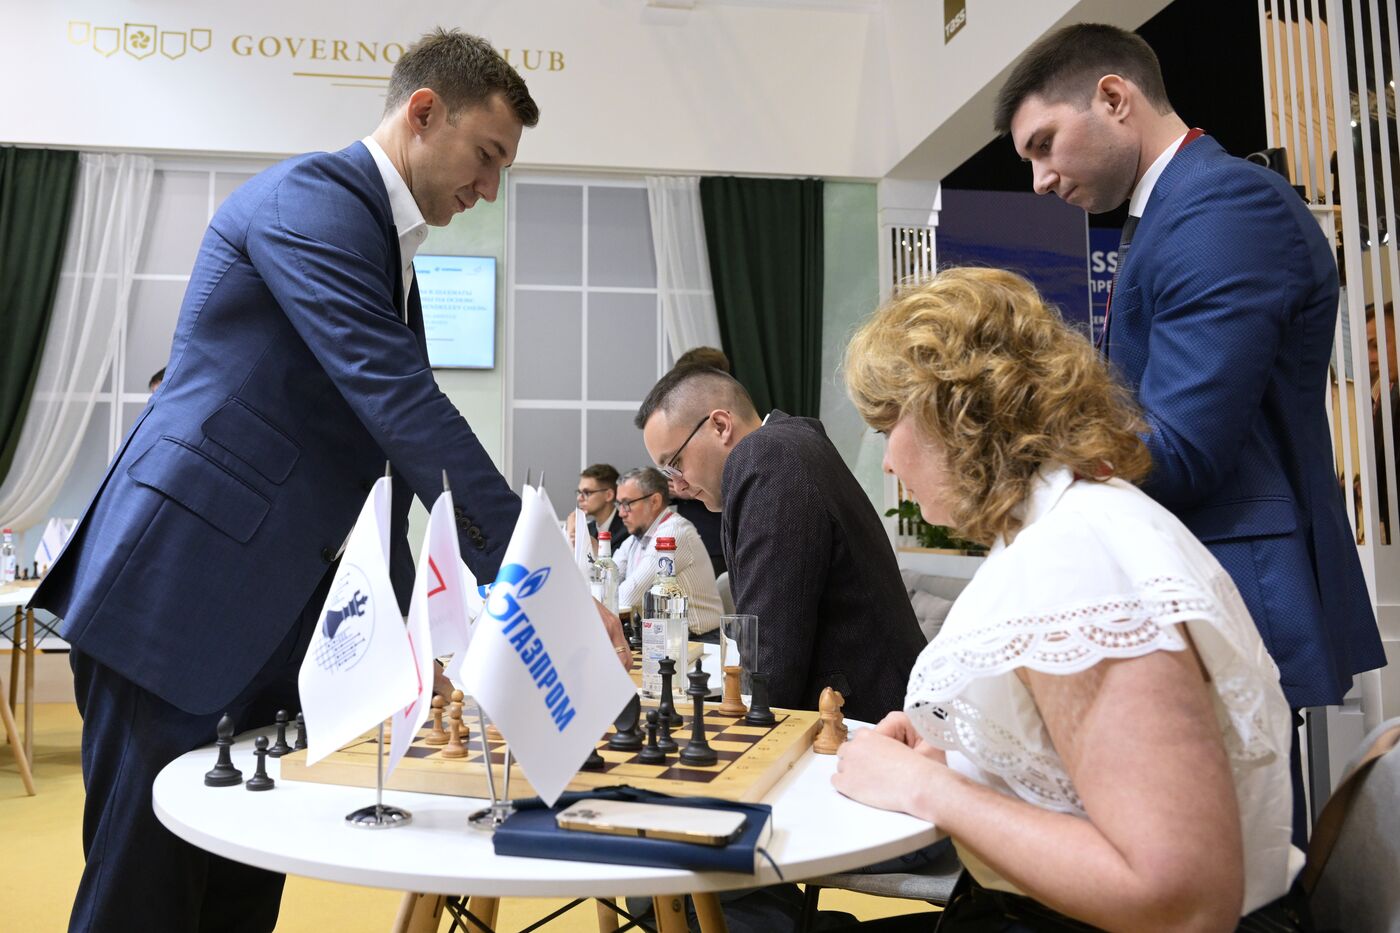 SPIEF-2023. Simultaneous exhibition with grandmaster using artificial intelligence.